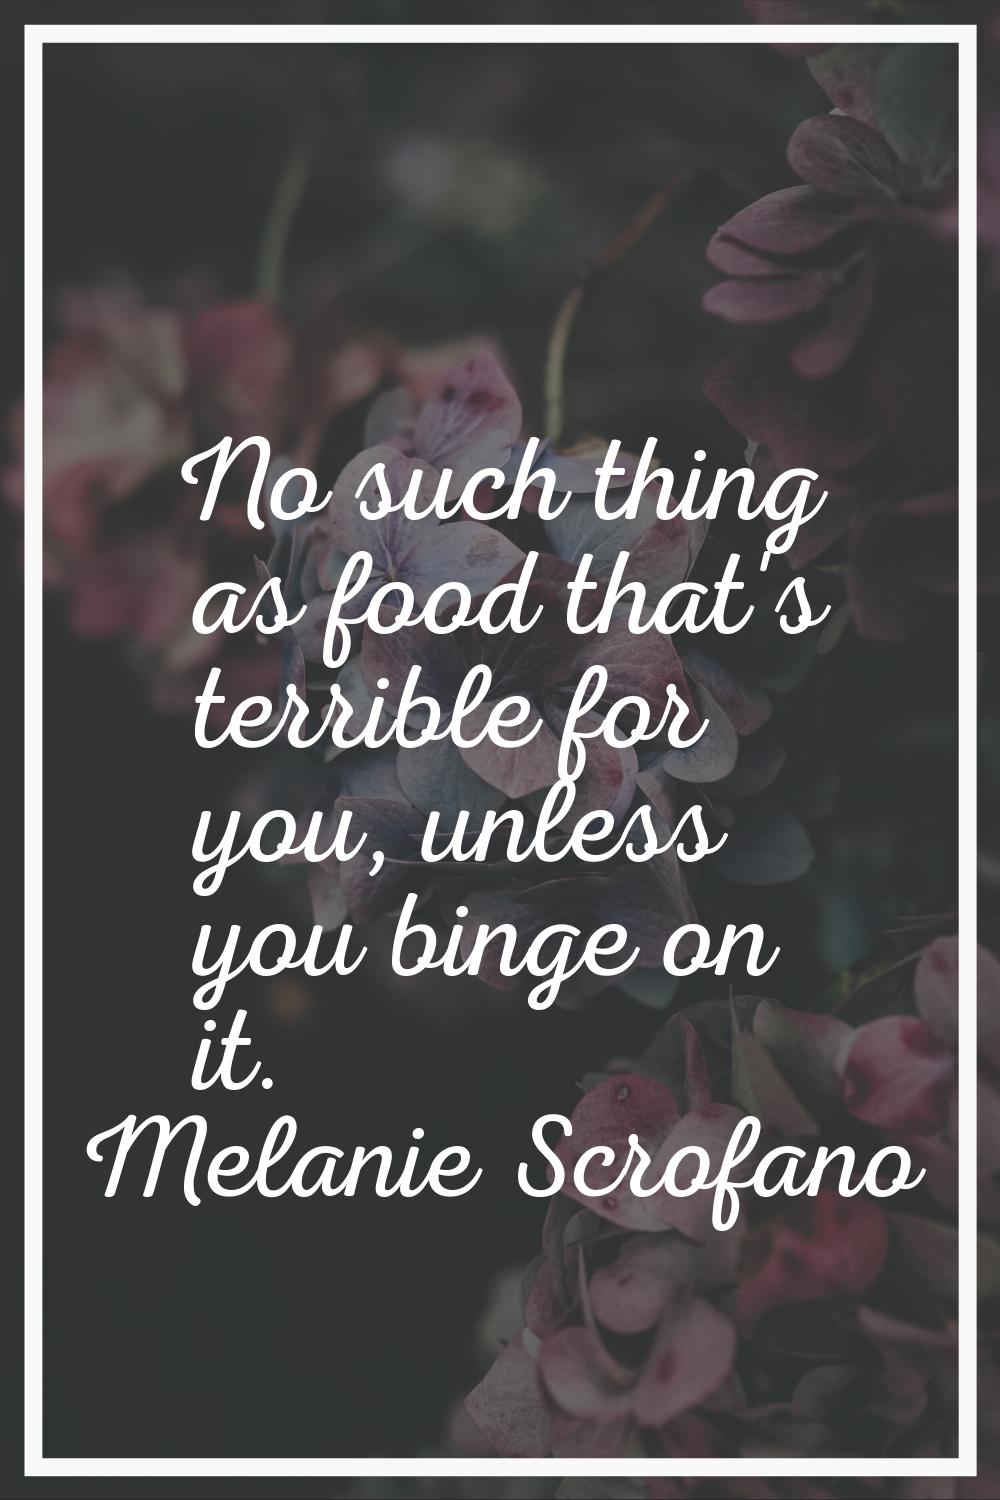 No such thing as food that's terrible for you, unless you binge on it.